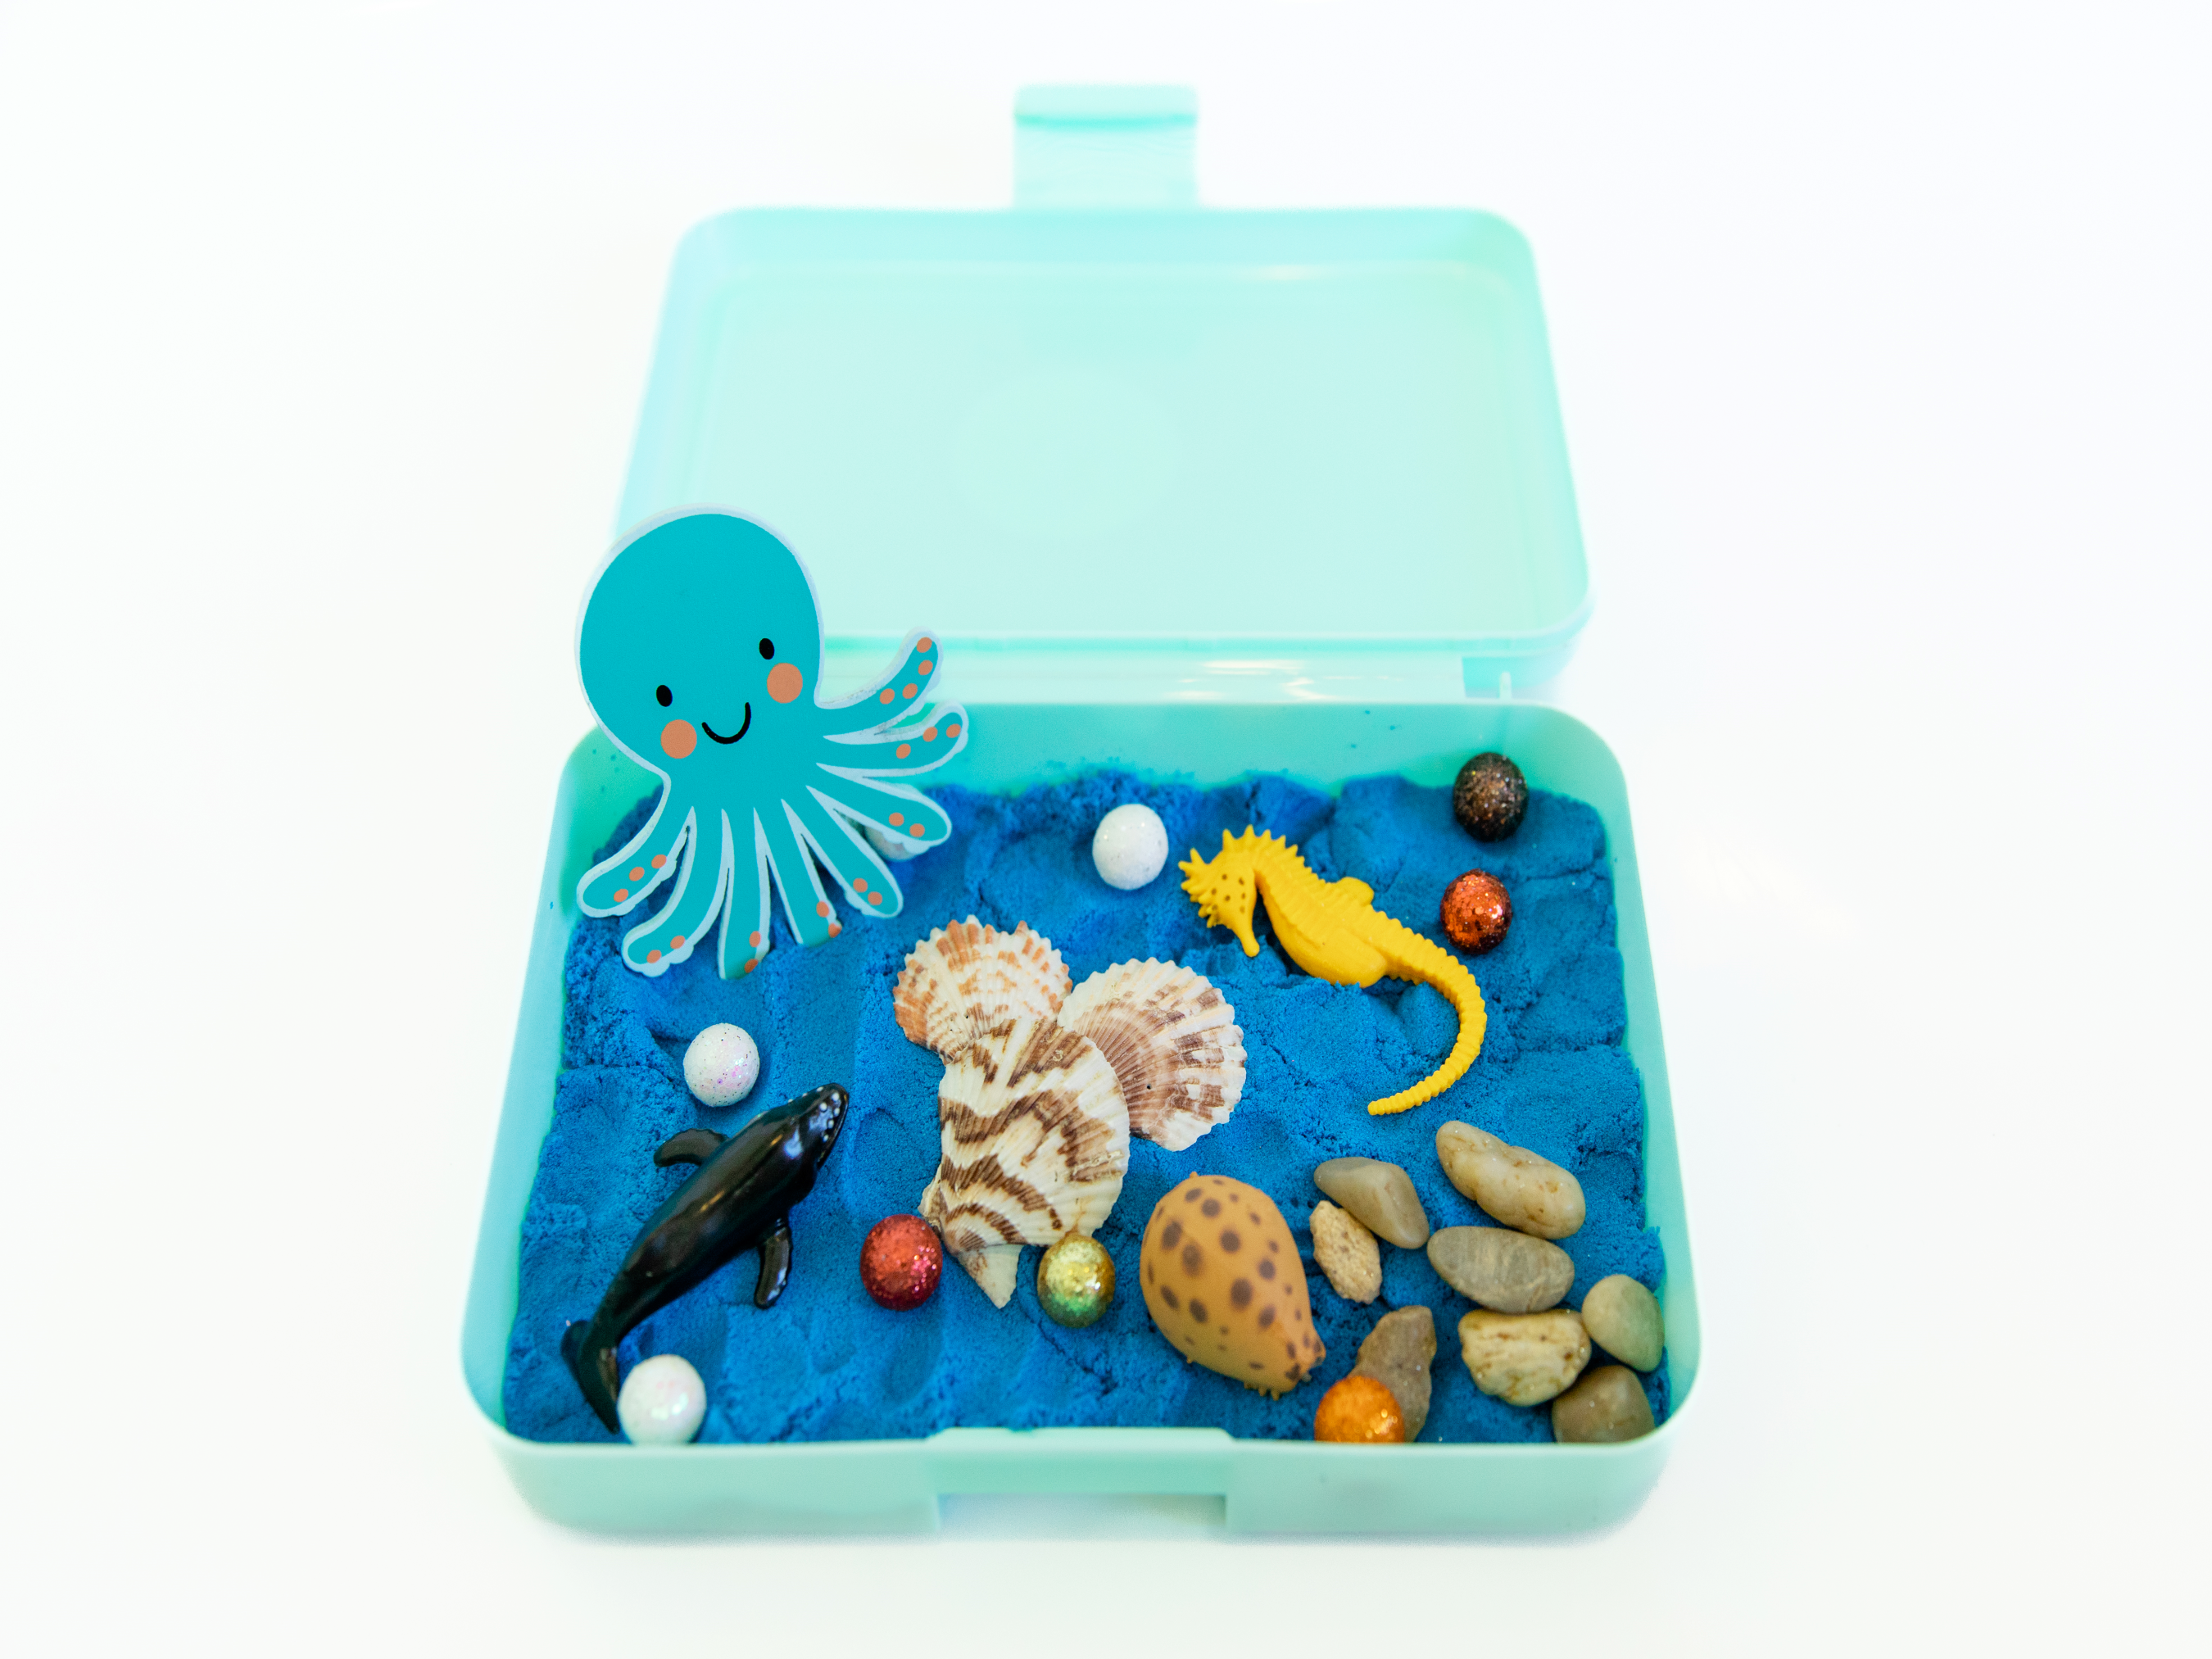 3 month Sensory Sand Sensory Bin- Perfect for kids 3-8- Makes a great holiday gift